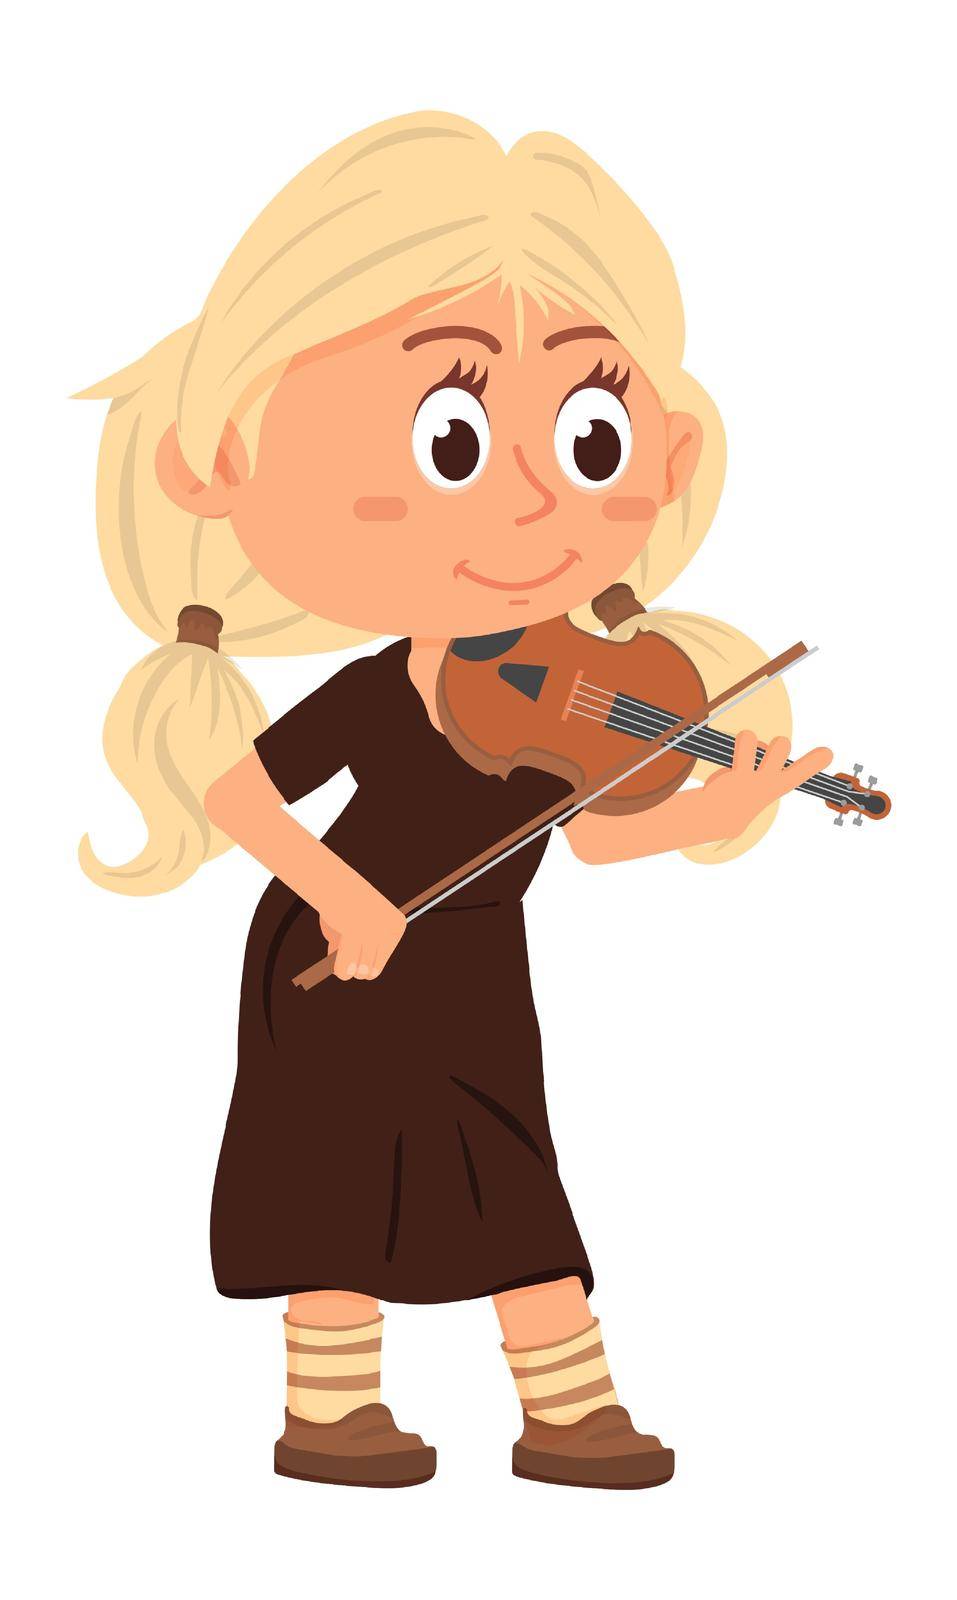 Violin musician. Young girl playing for orchestra concert by LadadikArt